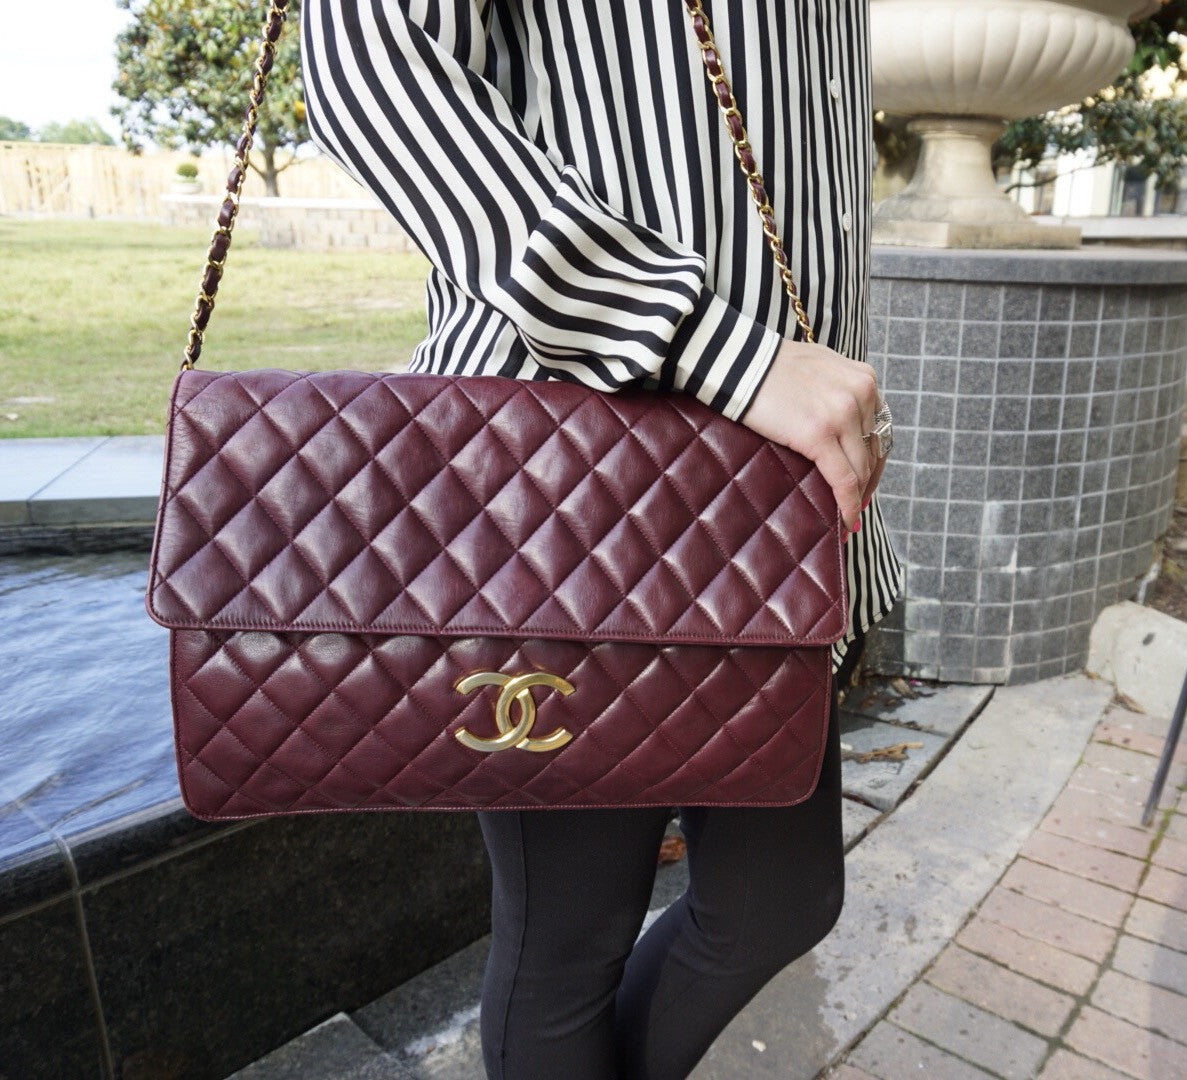 Chanel Timeless Small Flap bag Burgundy - Touched Vintage